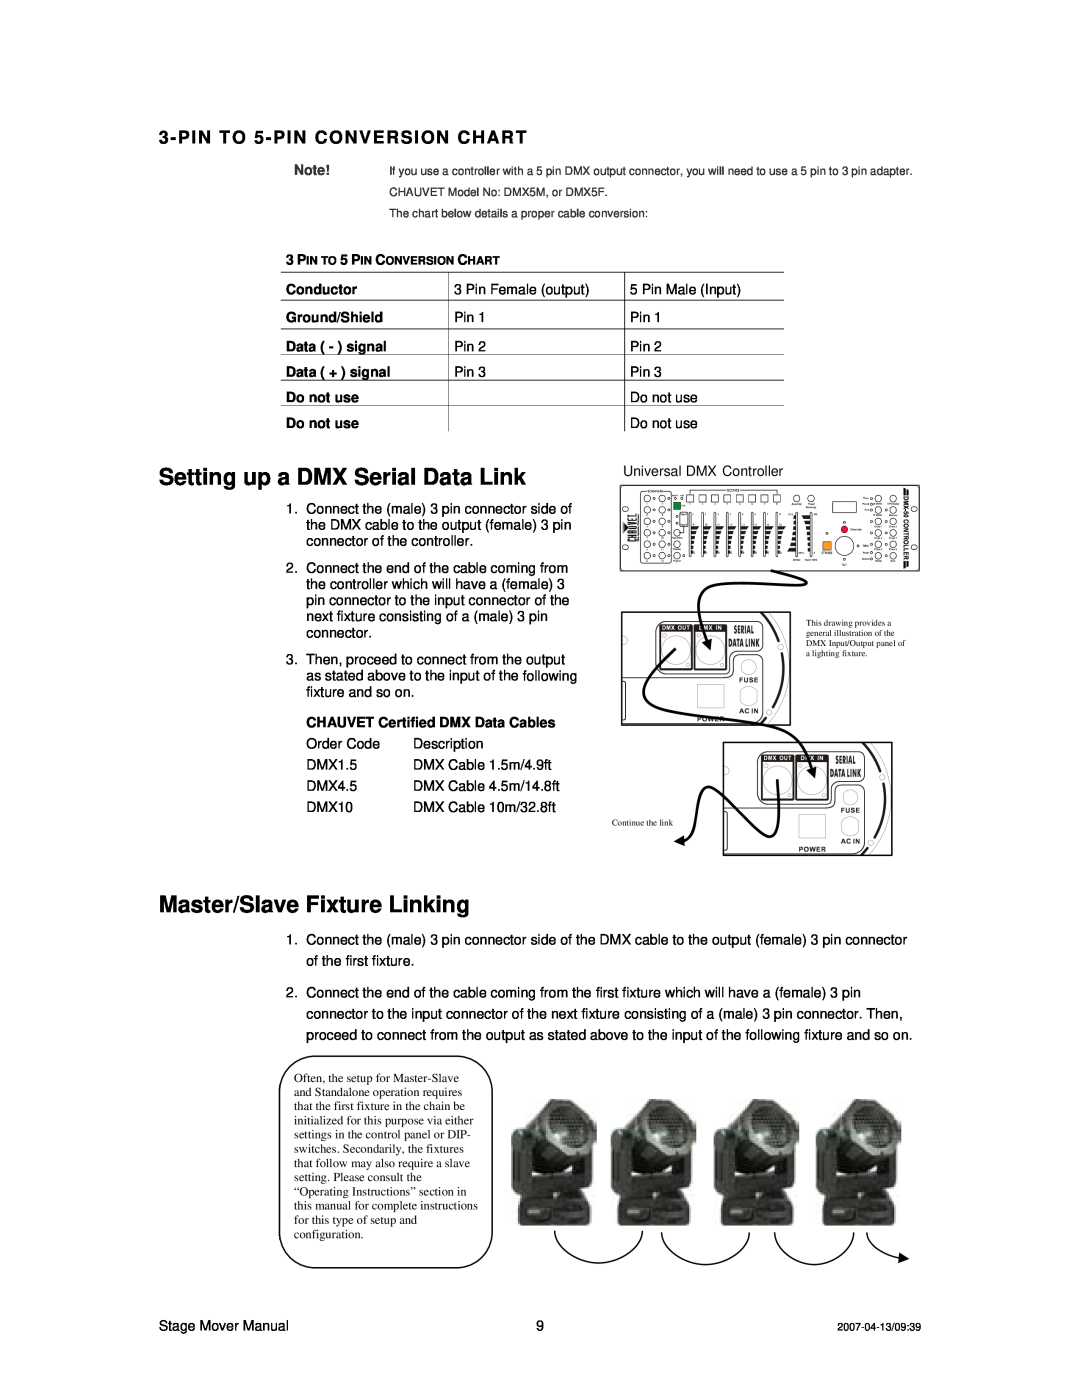 Chauvet DMX512 Setting up a DMX Serial Data Link, Master/Slave Fixture Linking, PINTO 5-PINCONVERSION CHART, Conductor 